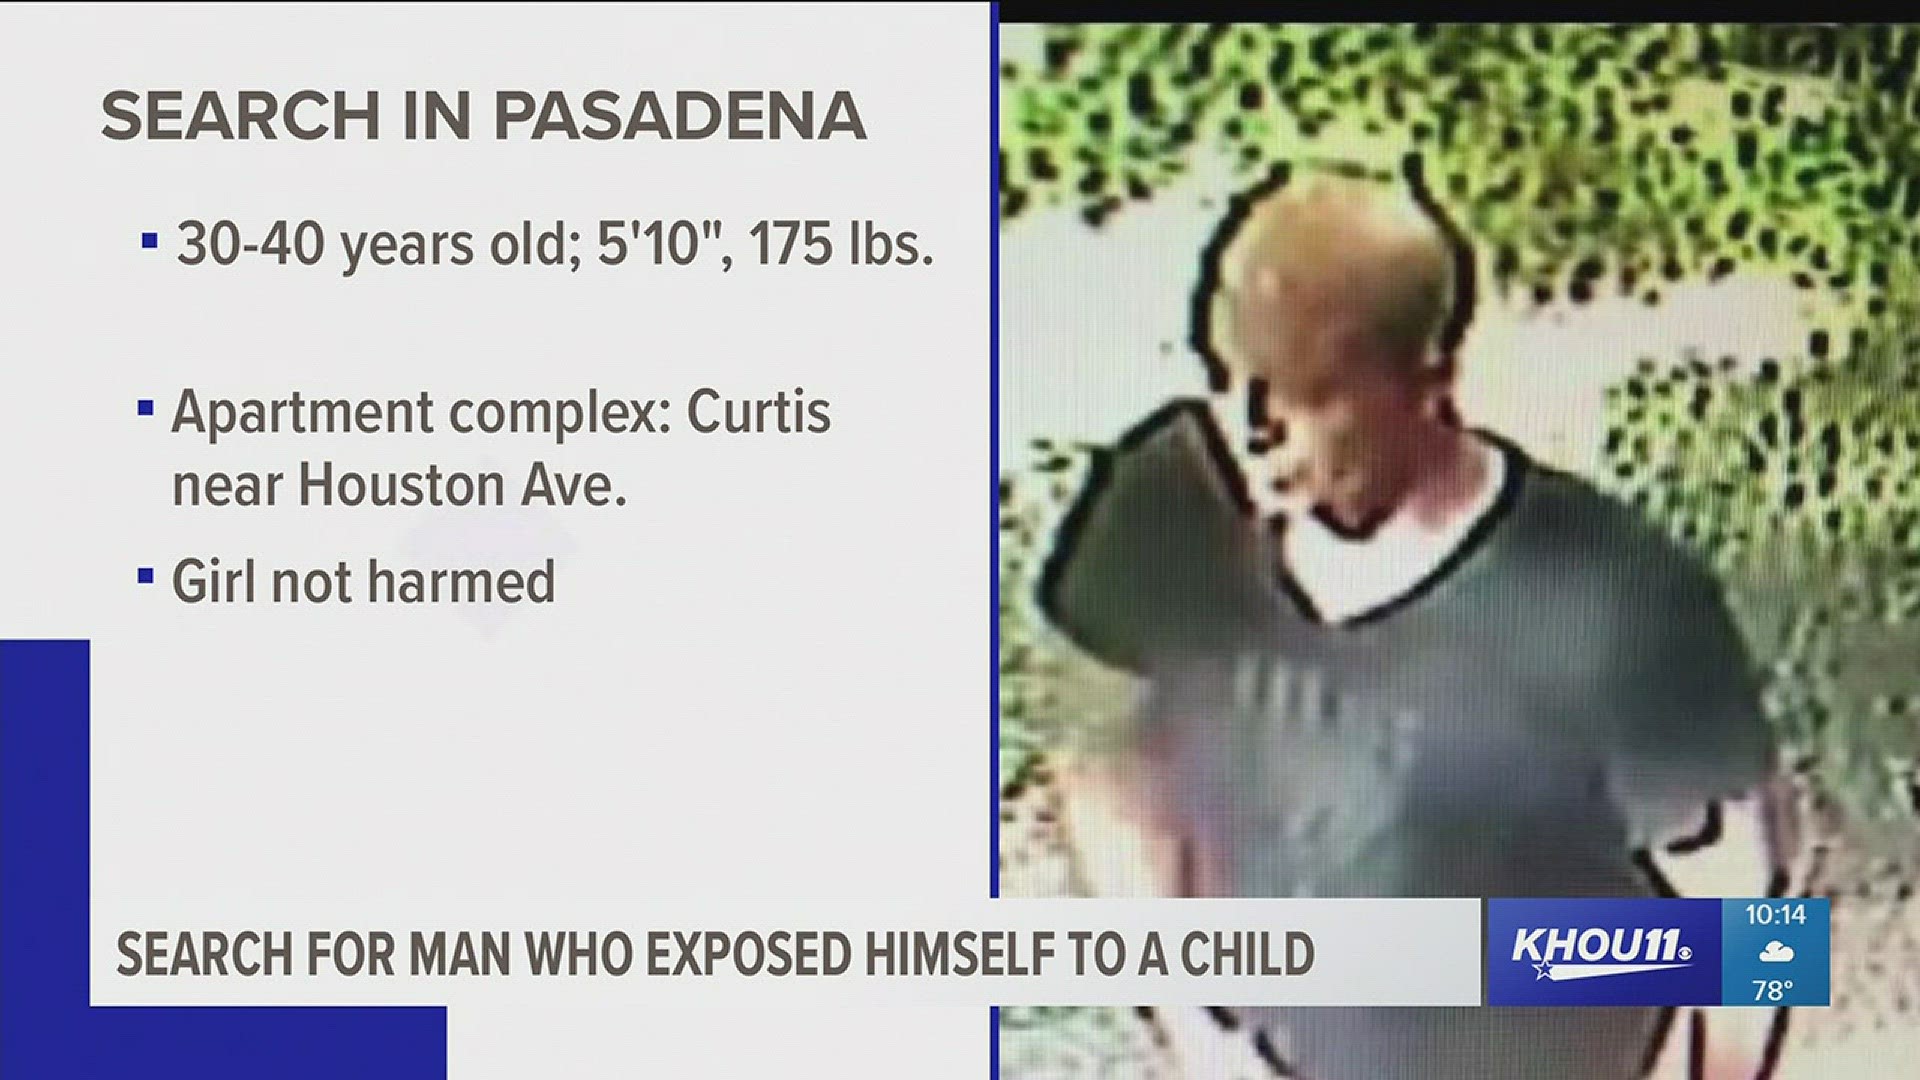 Pasadena Police are seeking the public's help in identifying a man accused of exposing himself to a child.